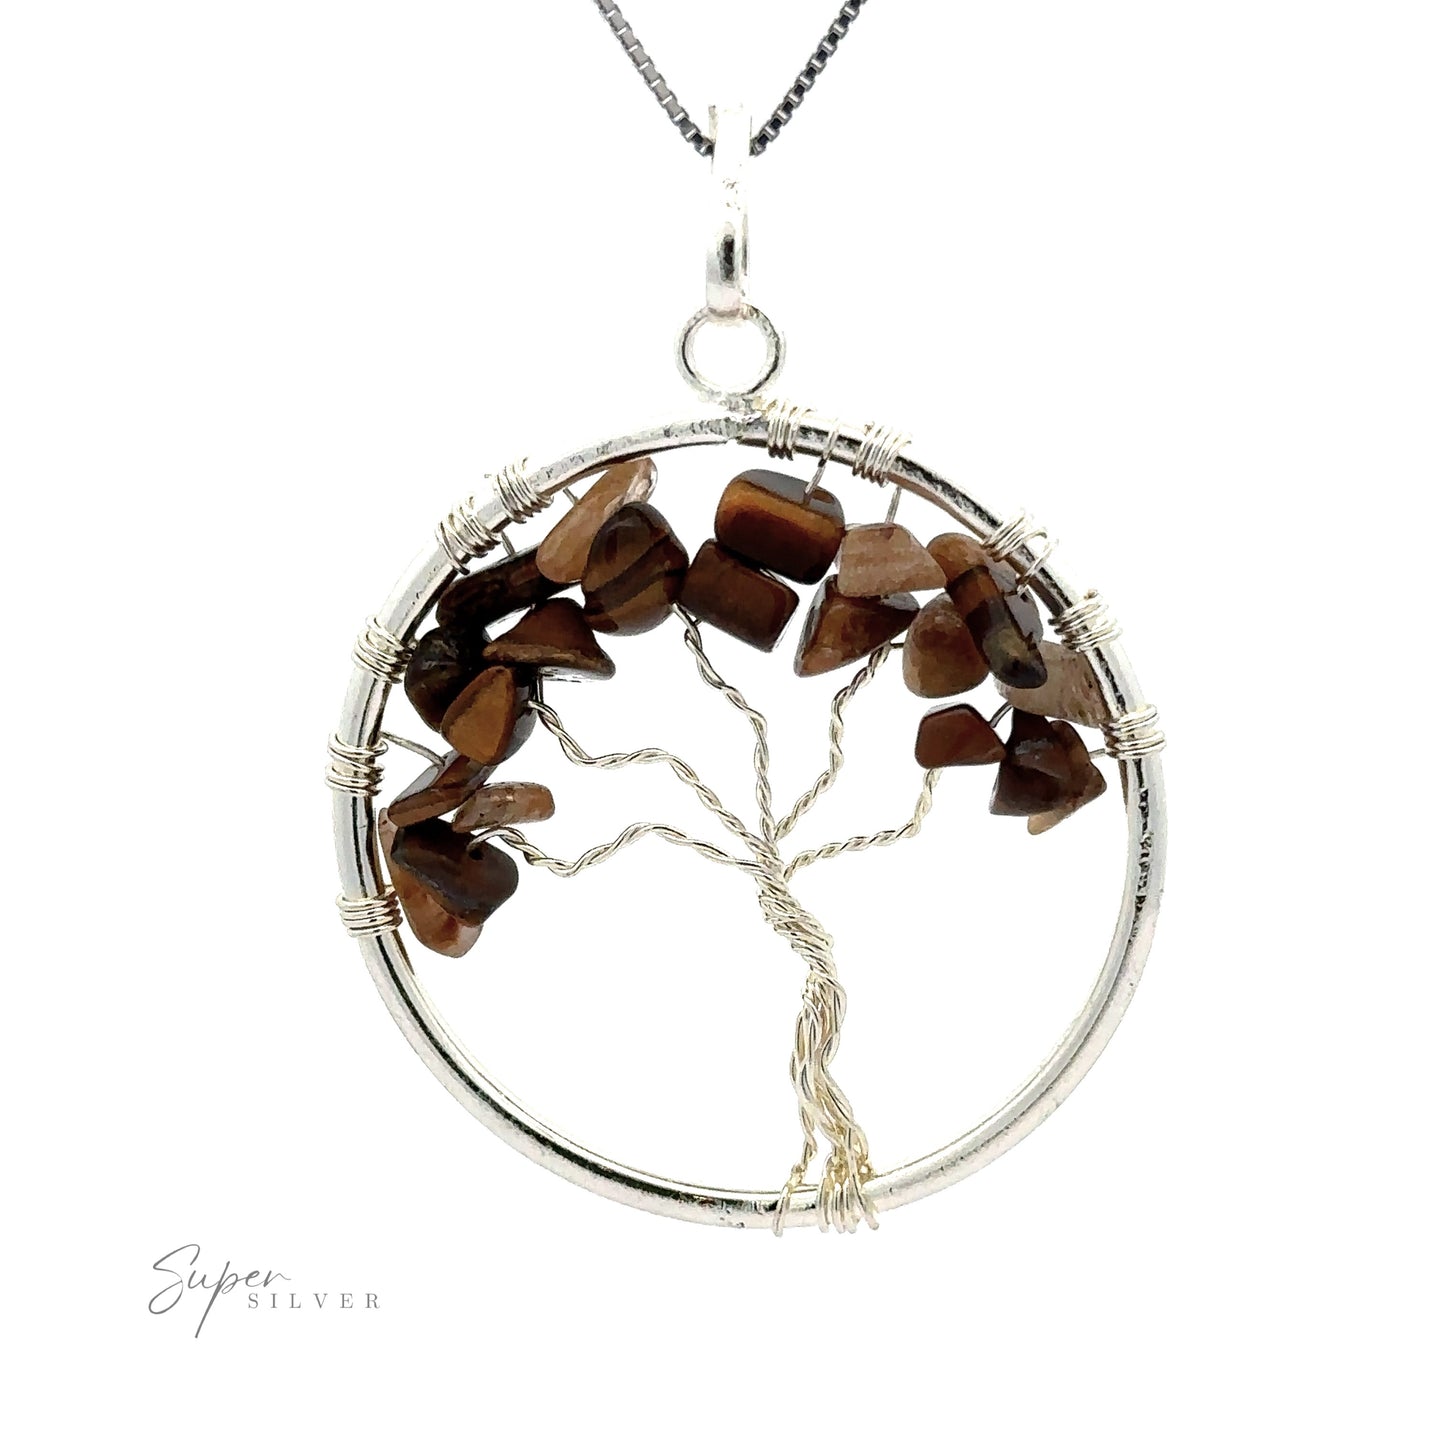 
                  
                    A stunning Wire Wrapped Tree of Life Pendant with Stones featuring a silver wire-wrapped tree with polished brown gemstone chips for leaves, encircled by a silver ring. The background is white.
                  
                